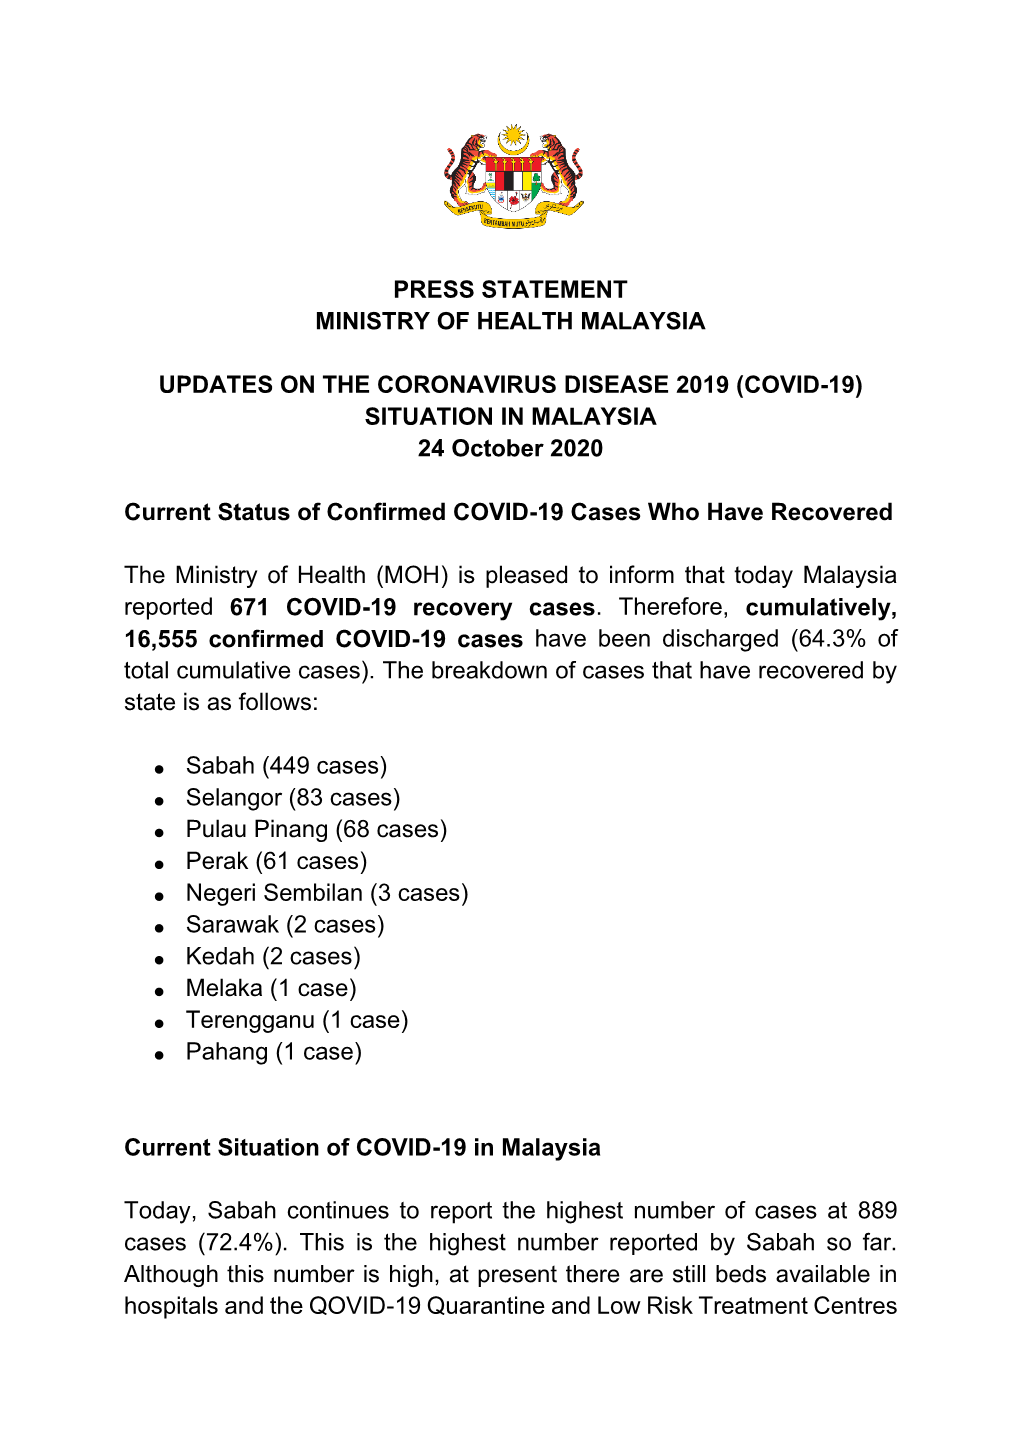 (COVID-19) SITUATION in MALAYSIA 24 October 2020